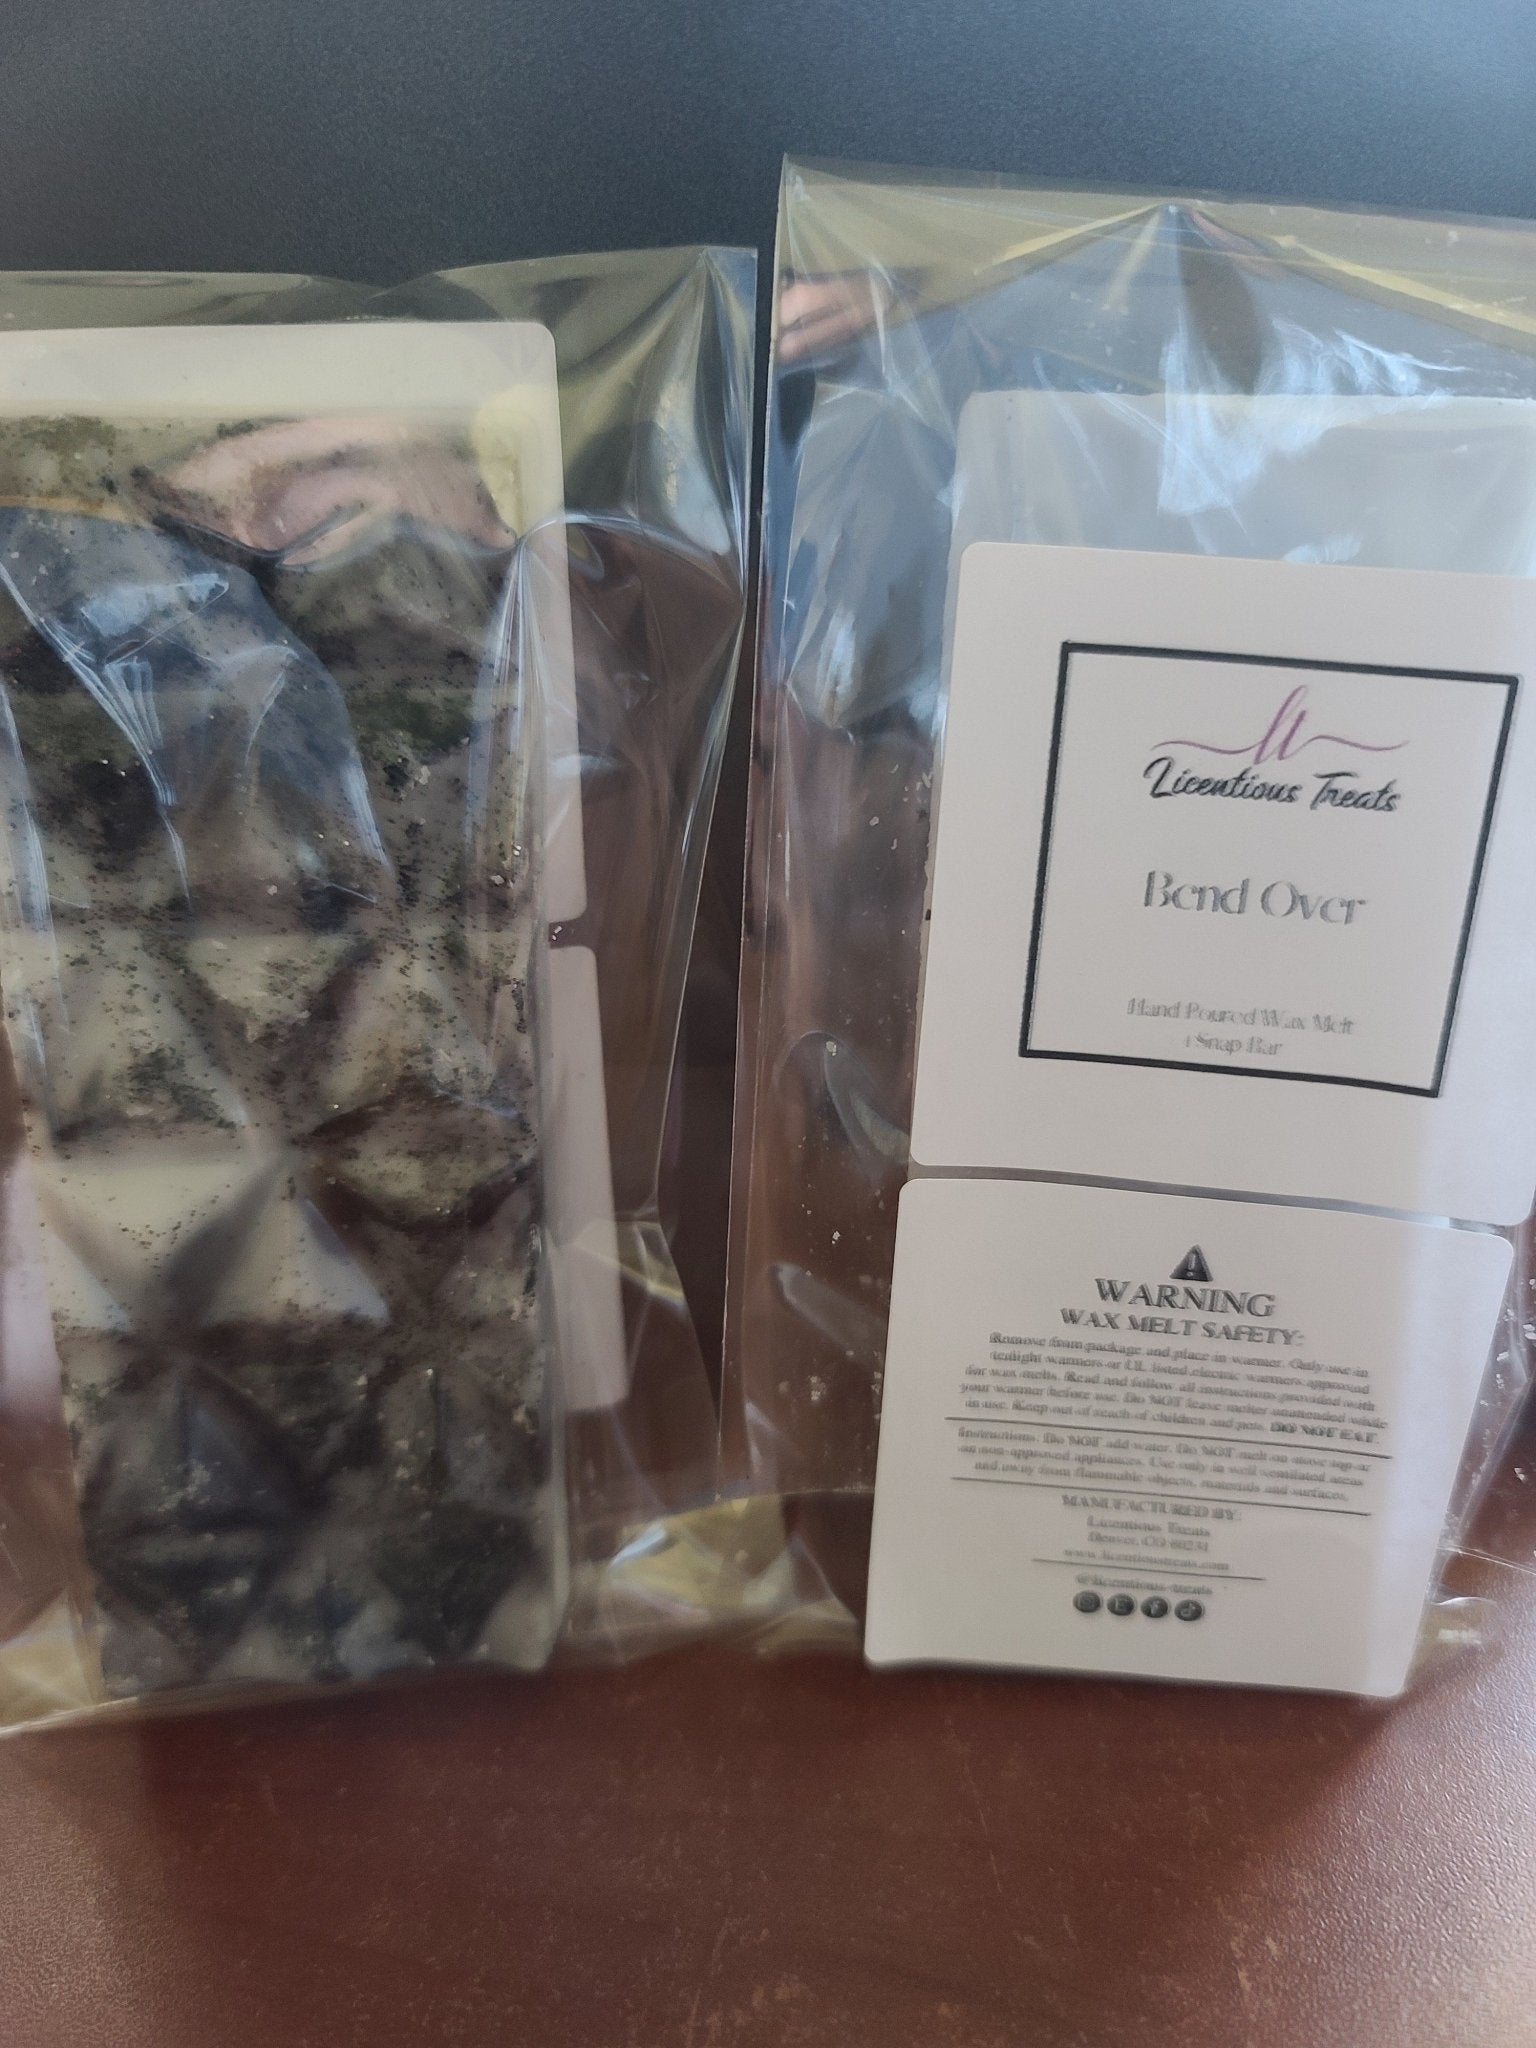 Wax Melts - Bend Over - Licentious TreatsWax Melts - Bend Over